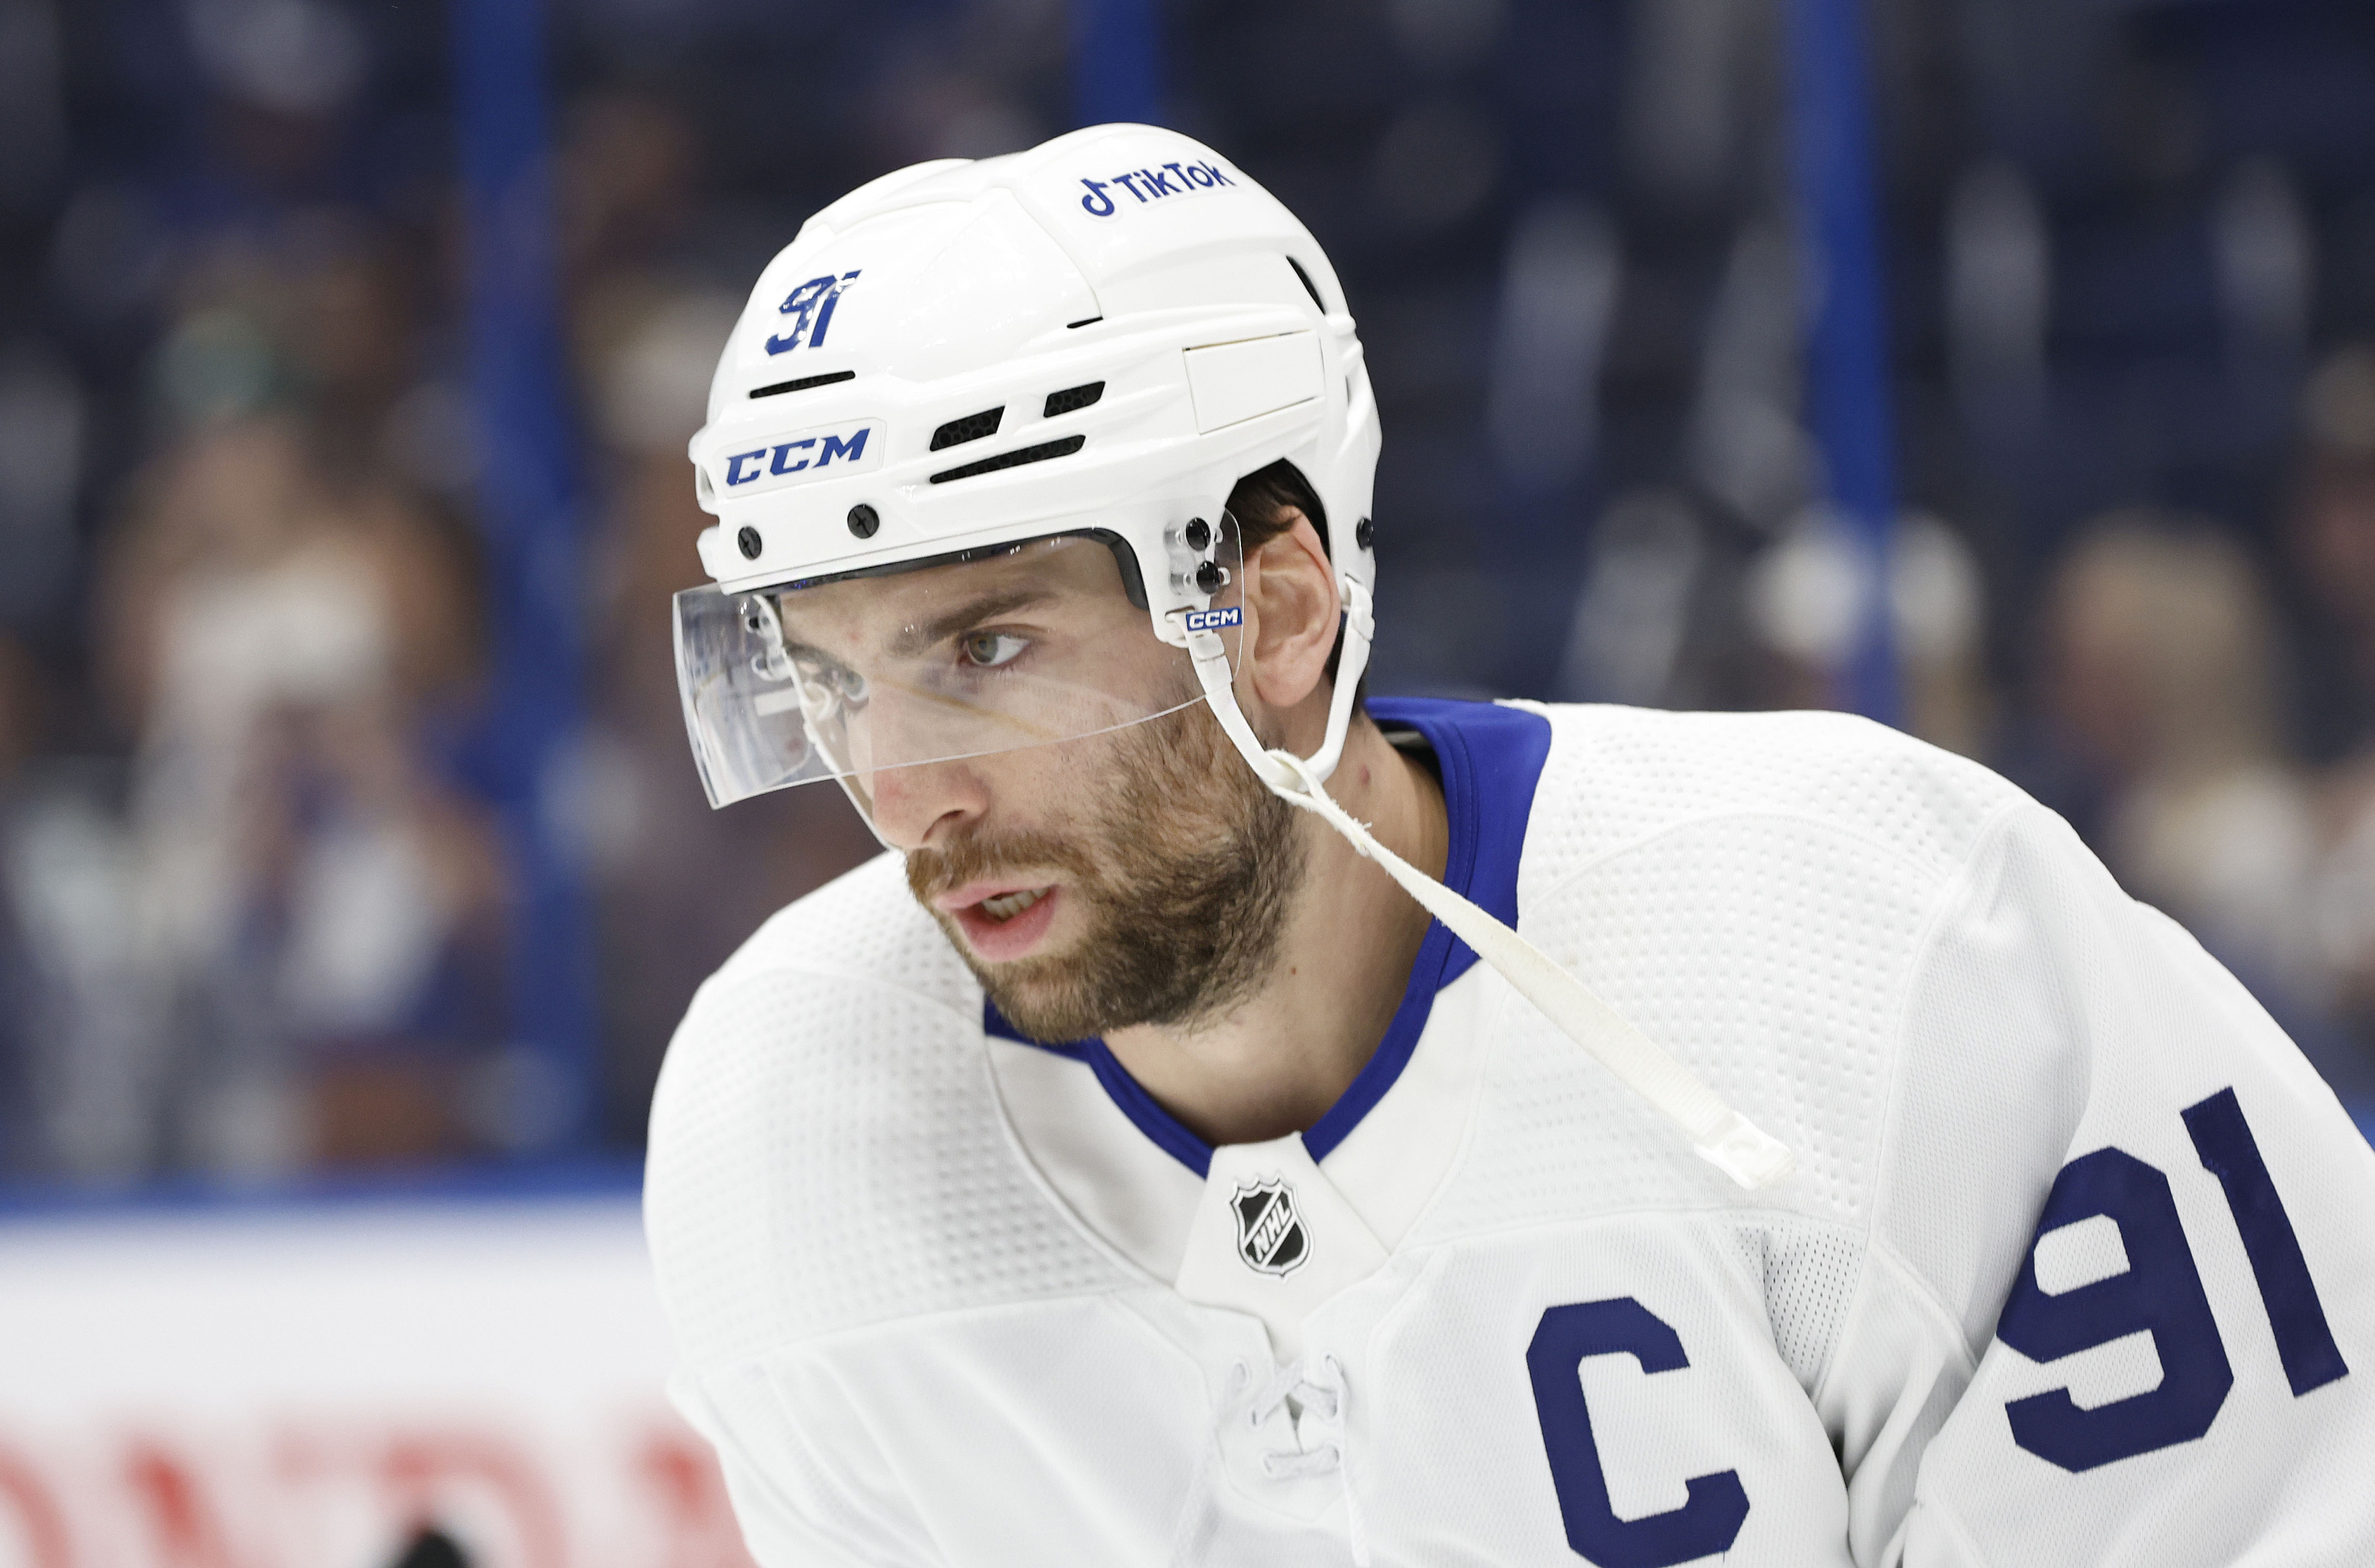 John Tavares on the Maple Leafs' off-season of change: 'The page